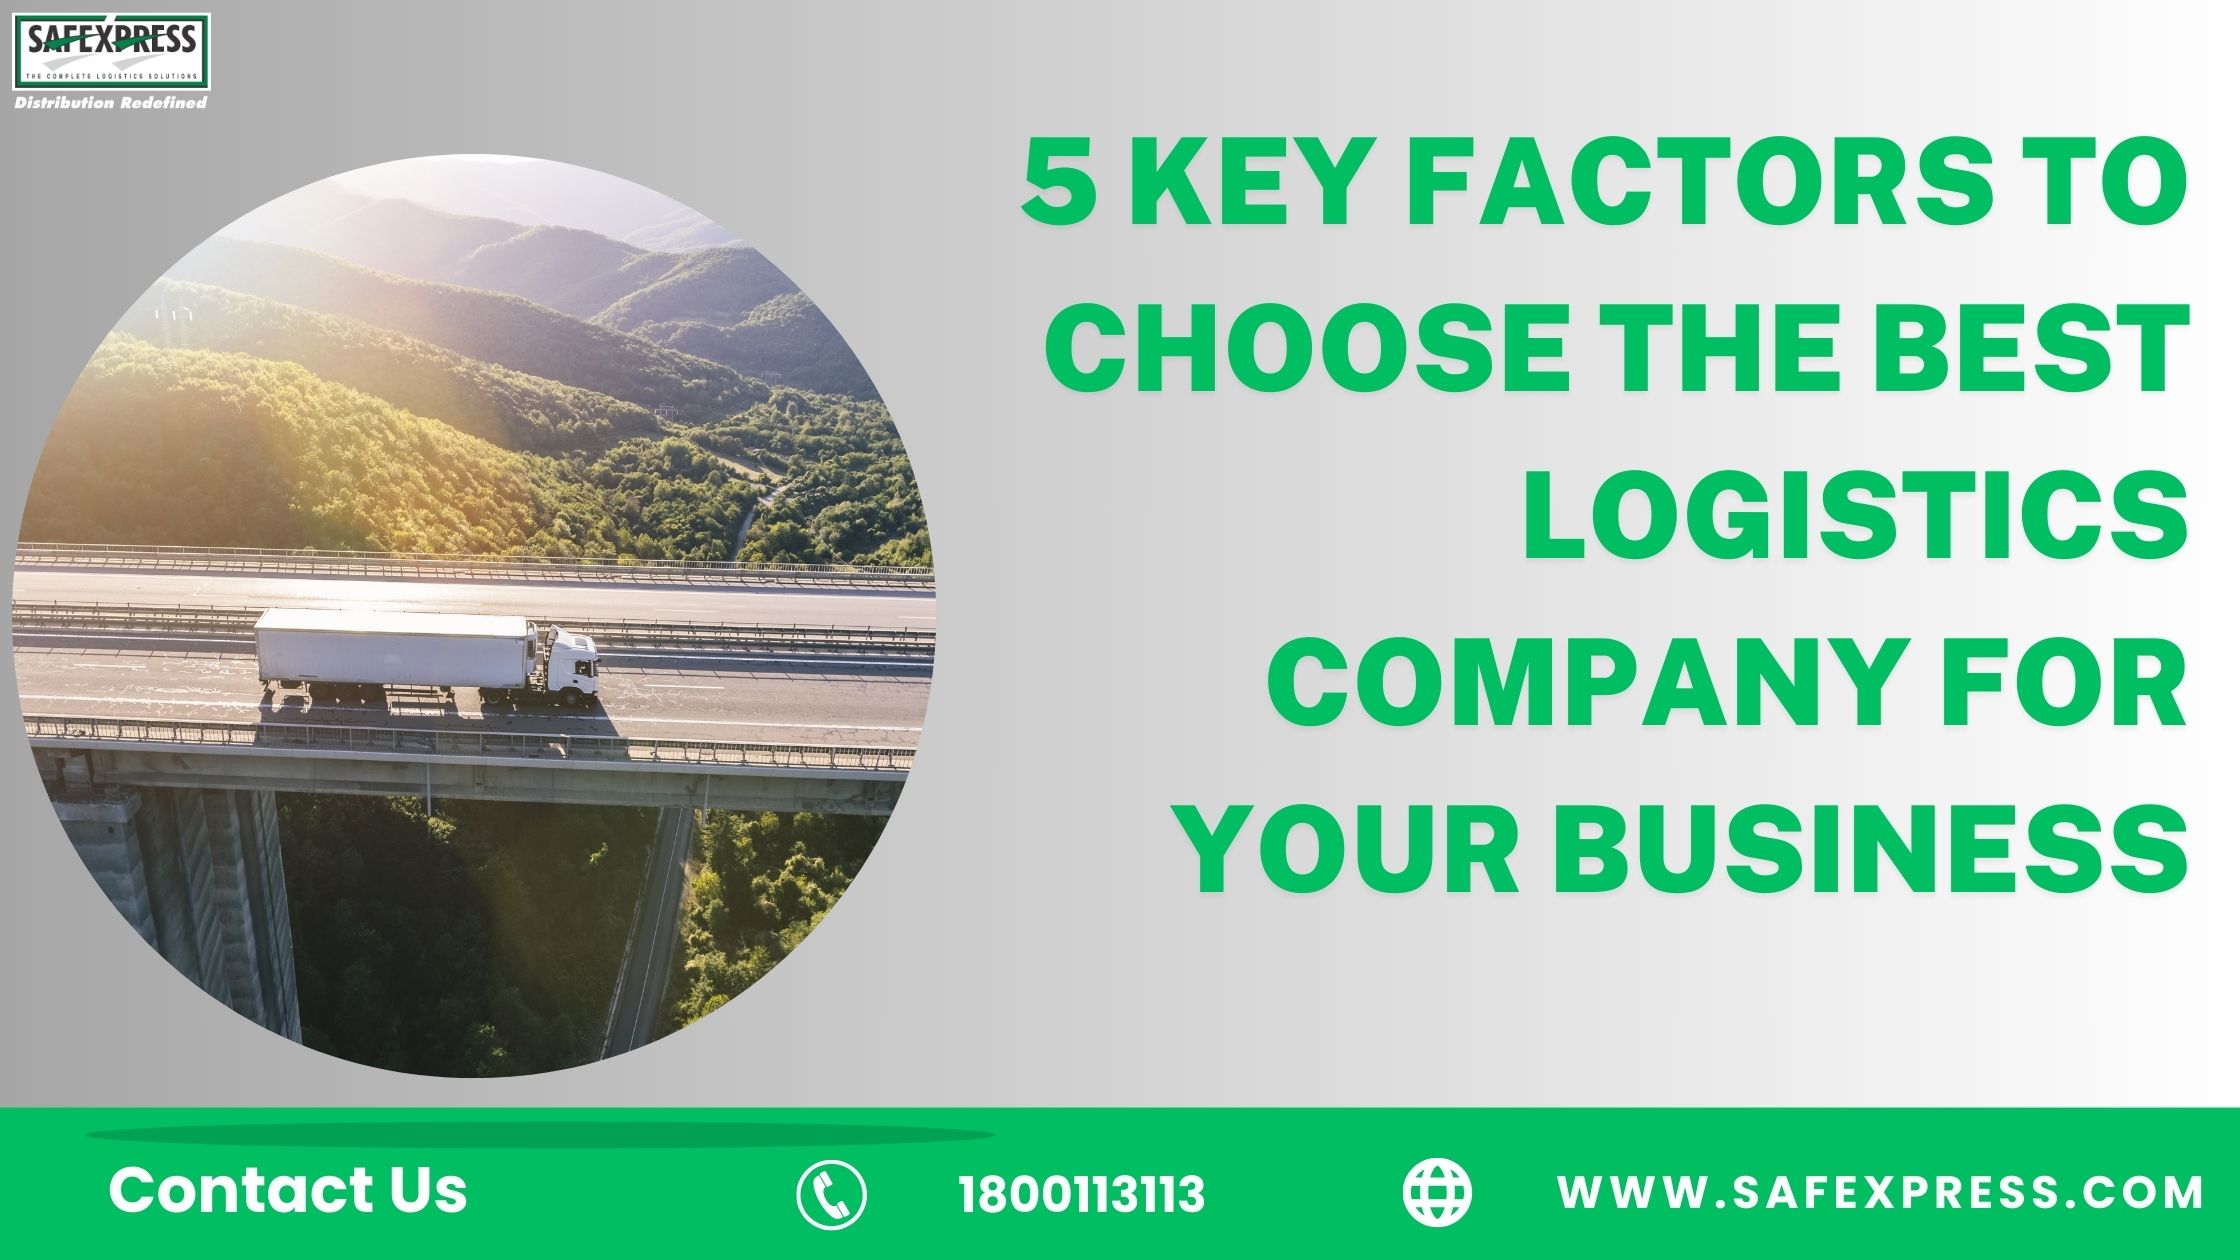  5 Key Factors to Choose the Best Logistics Company for Your Business